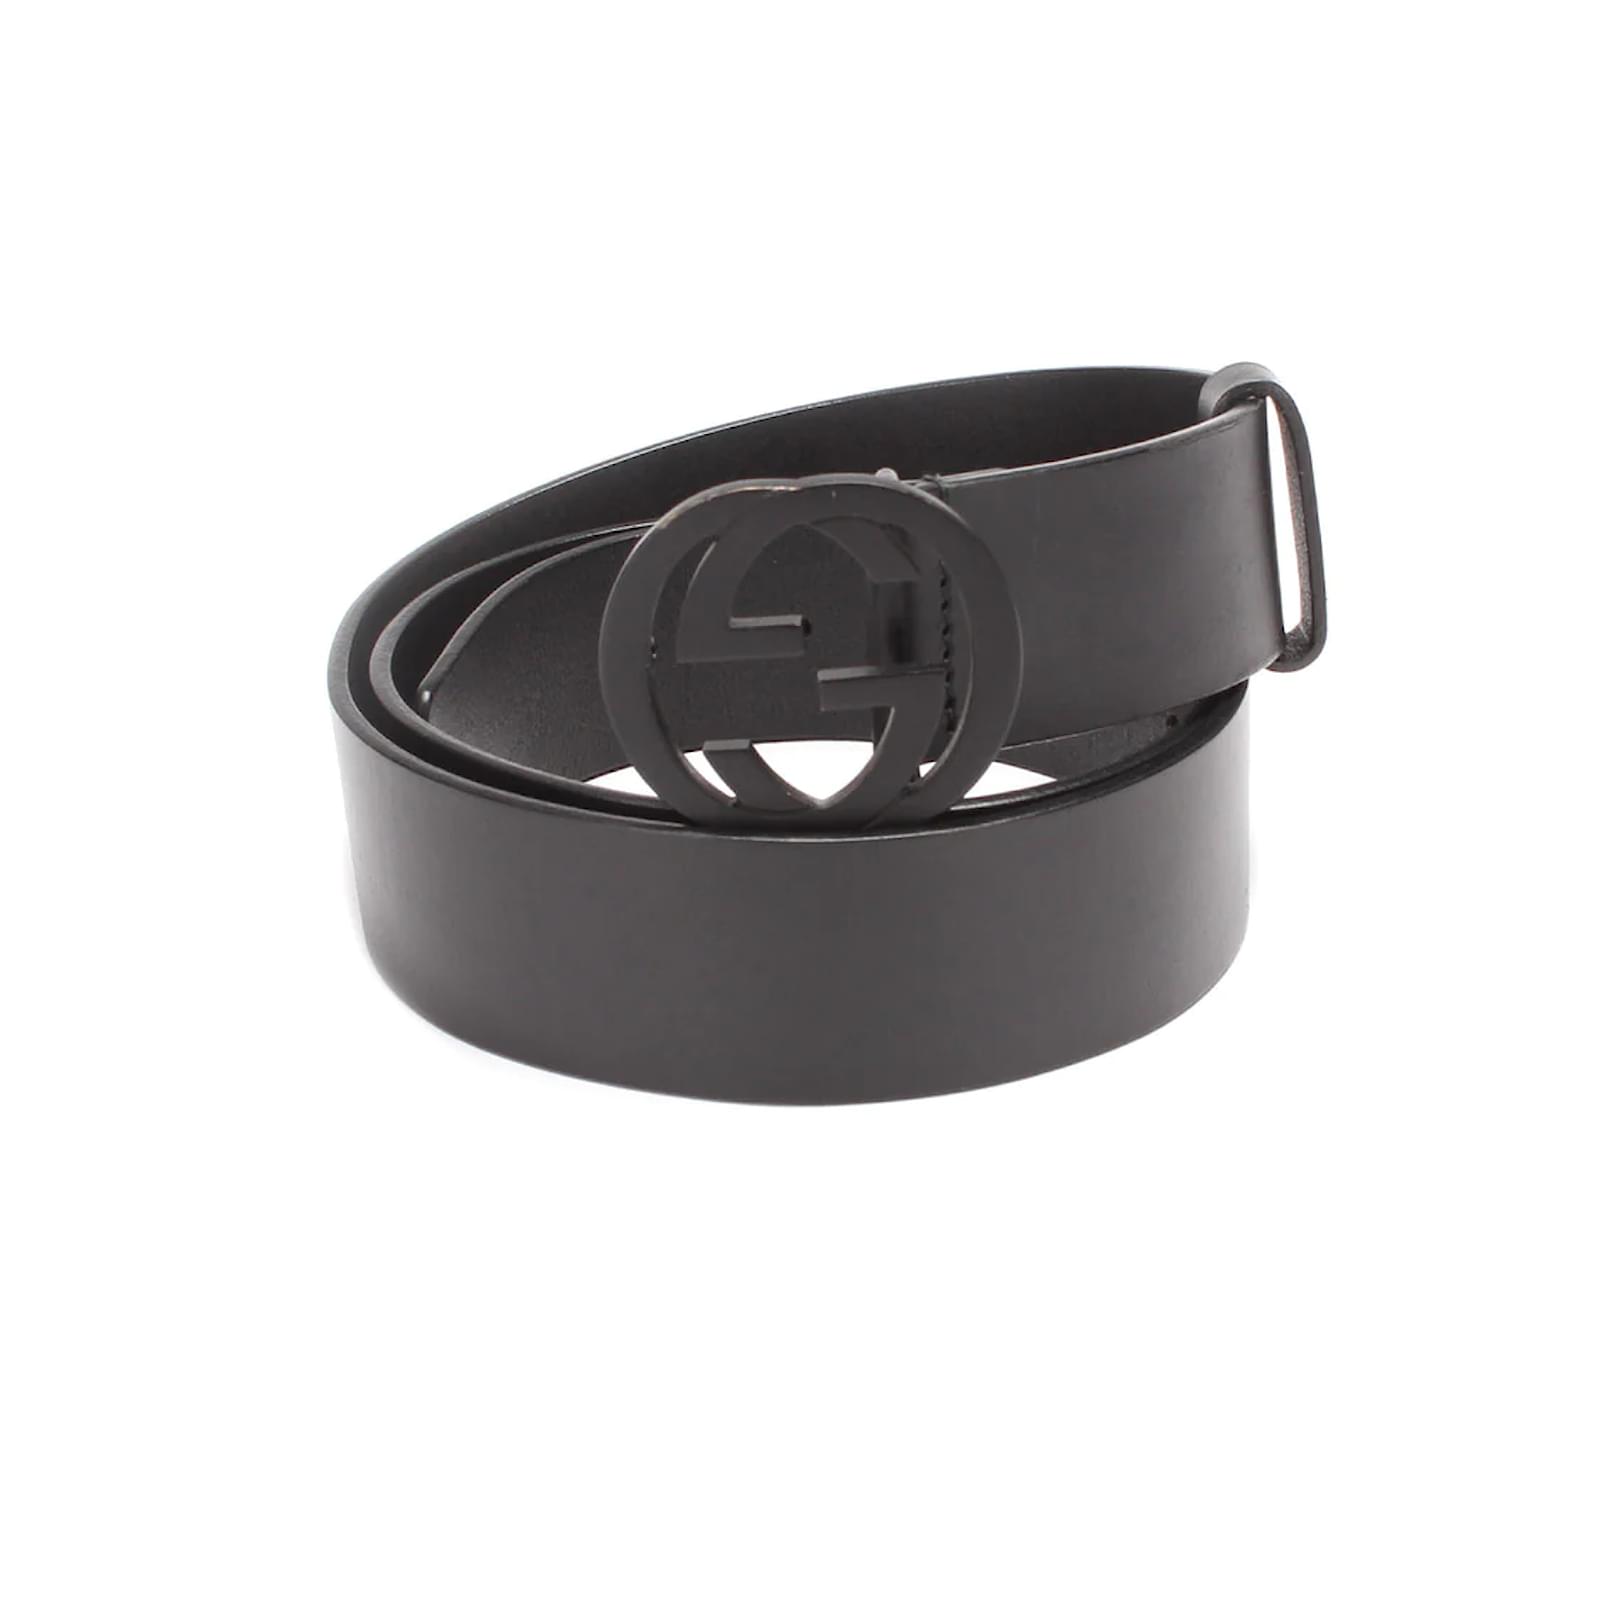 Gucci Leather Belt with Interlocking G Buckle